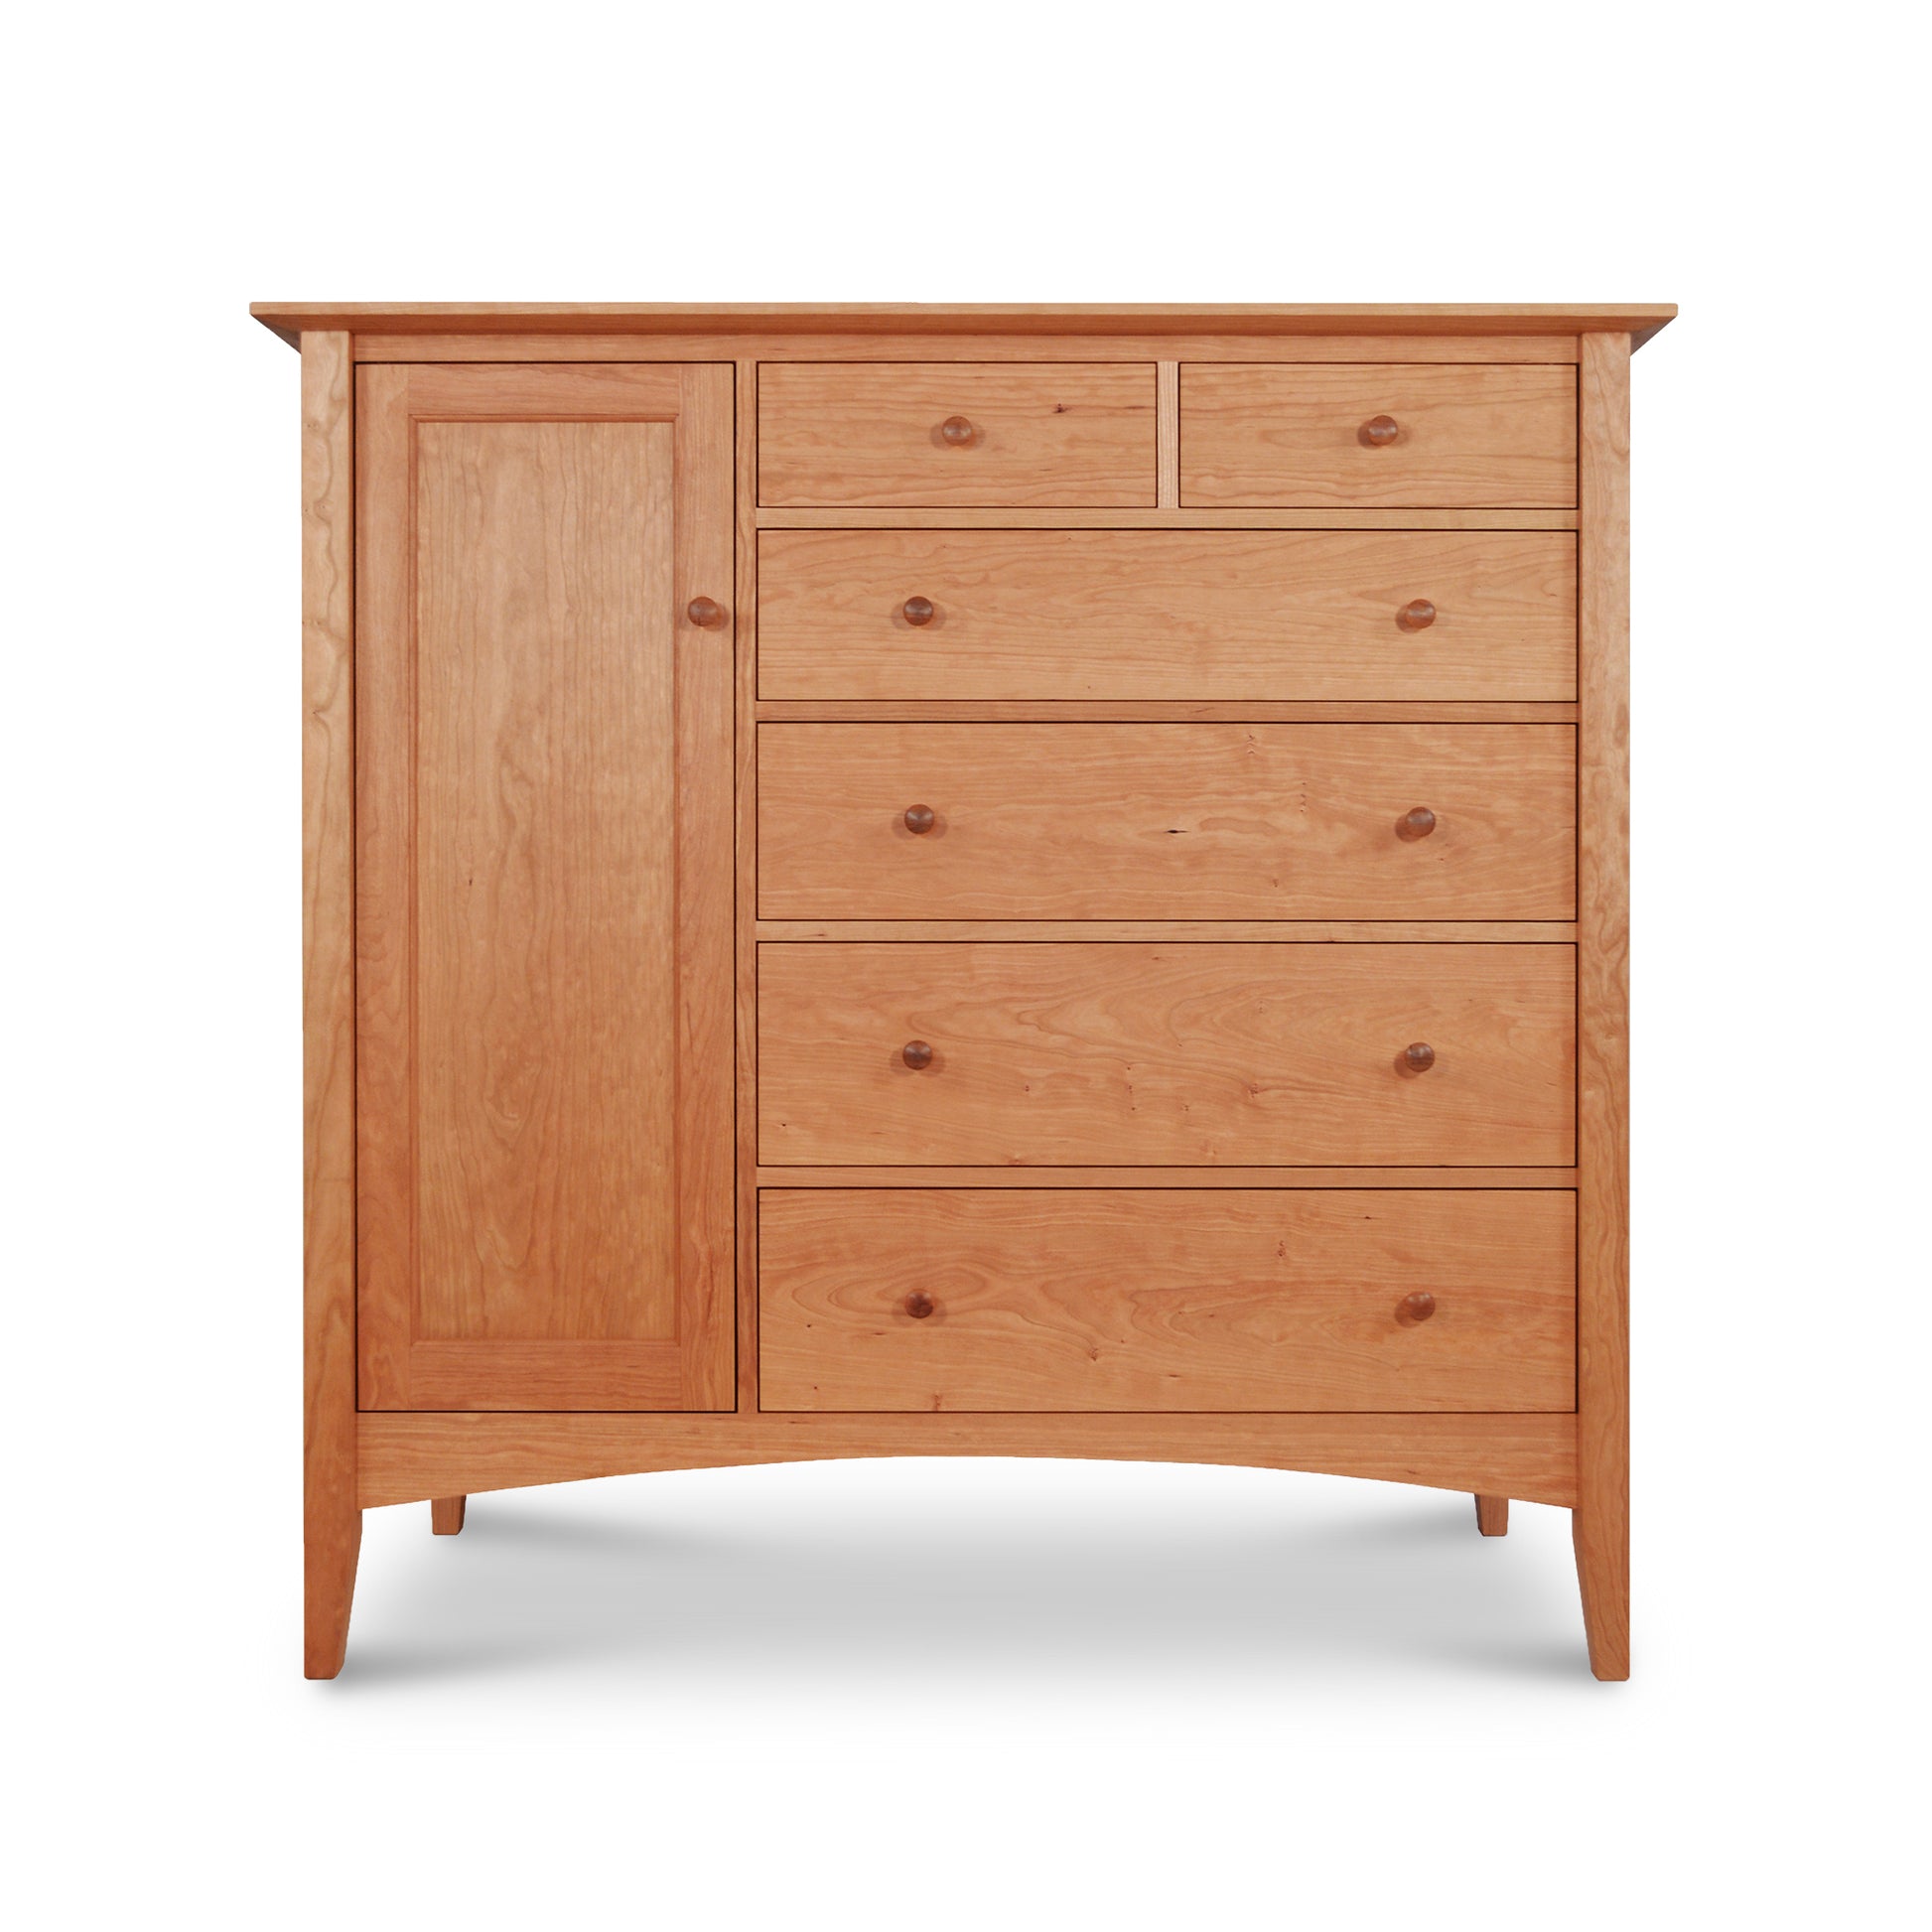 A Maple Corner Woodworks American Shaker Gent's Chest is isolated on a white background, featuring a tall cabinet section on the left and multiple varying sized drawers on the right.